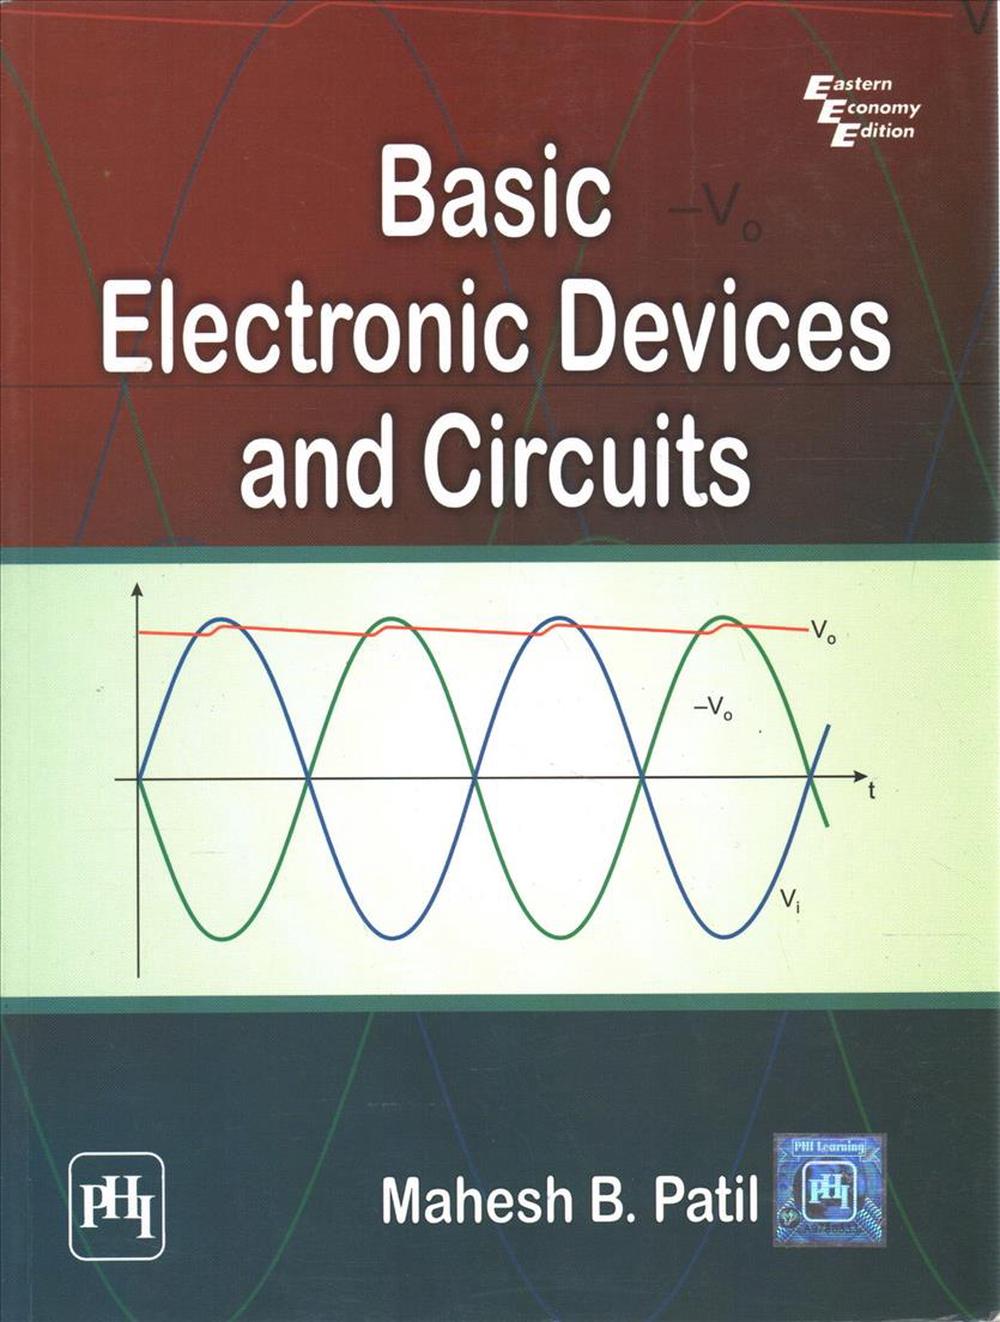 electronic devices and circuits by sanjeev gupta